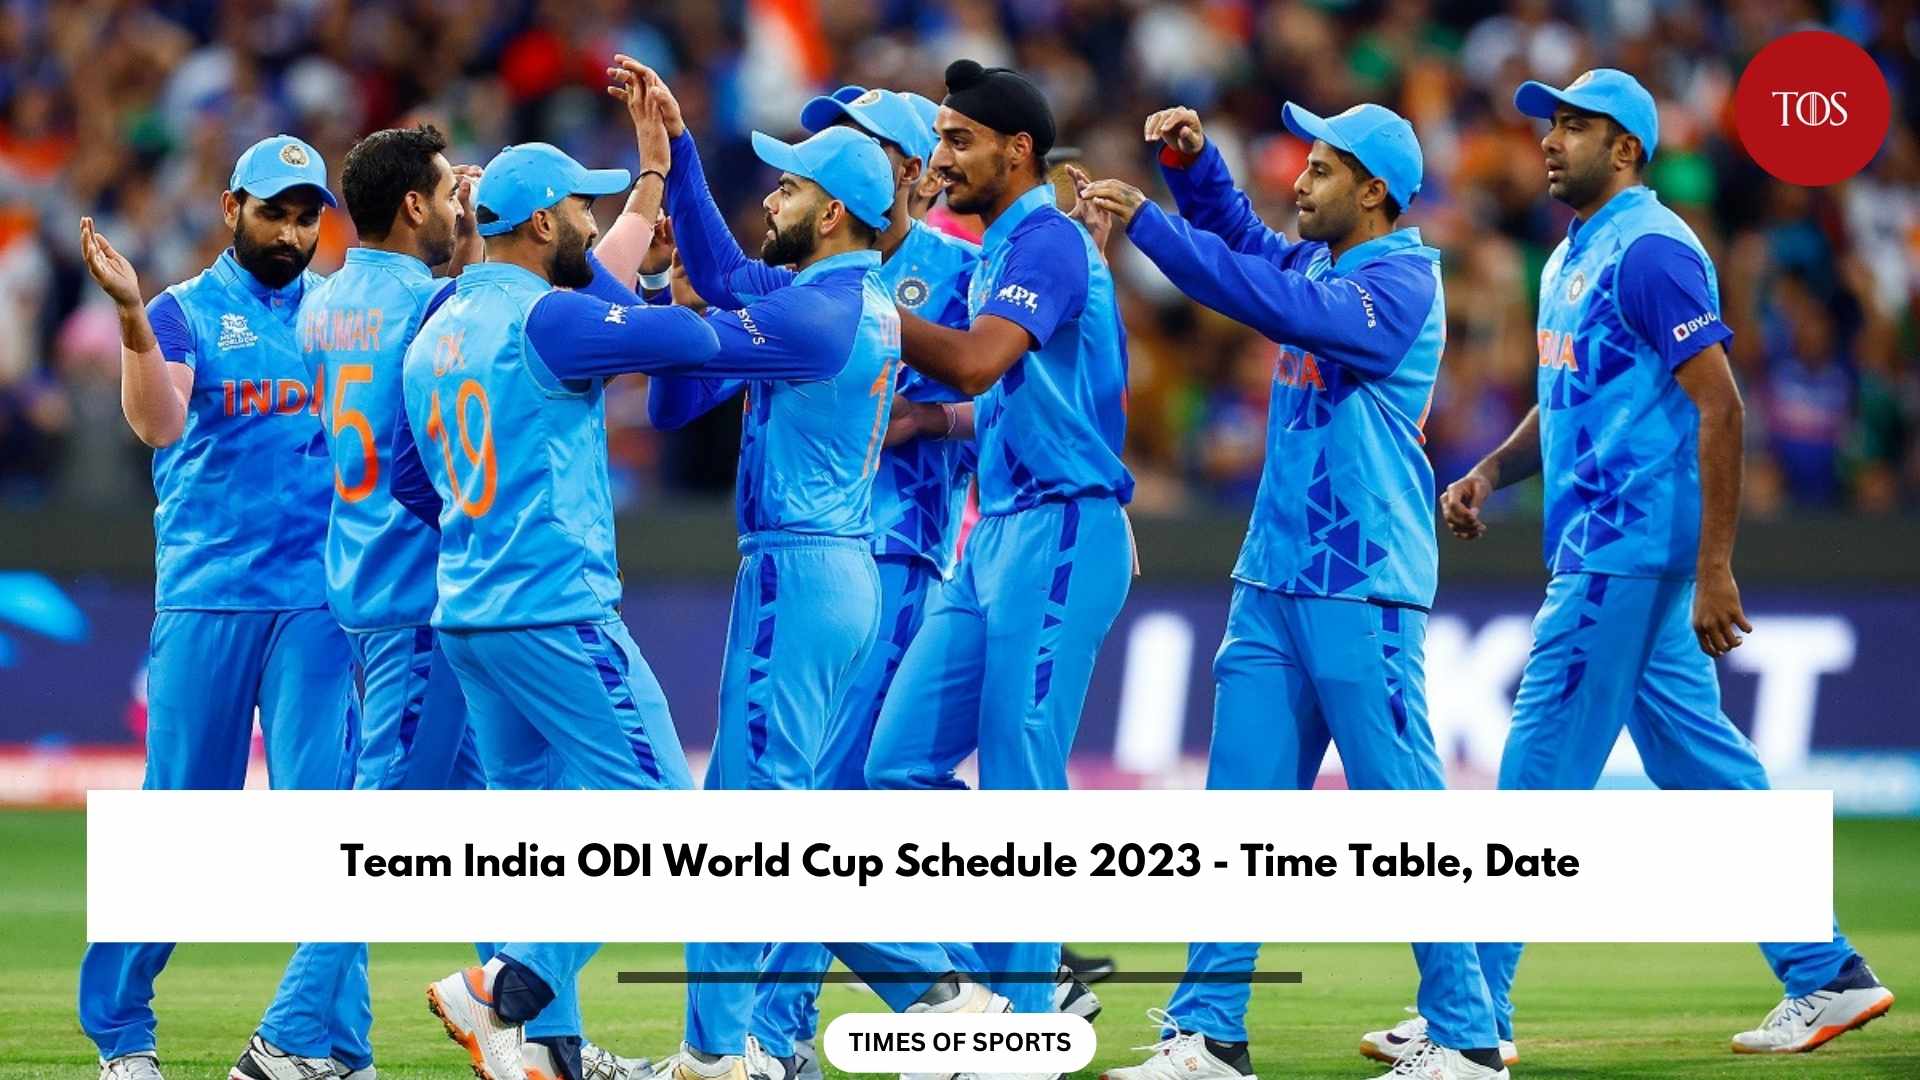 Team India ODI World Cup Schedule 2023 Time Table, Date